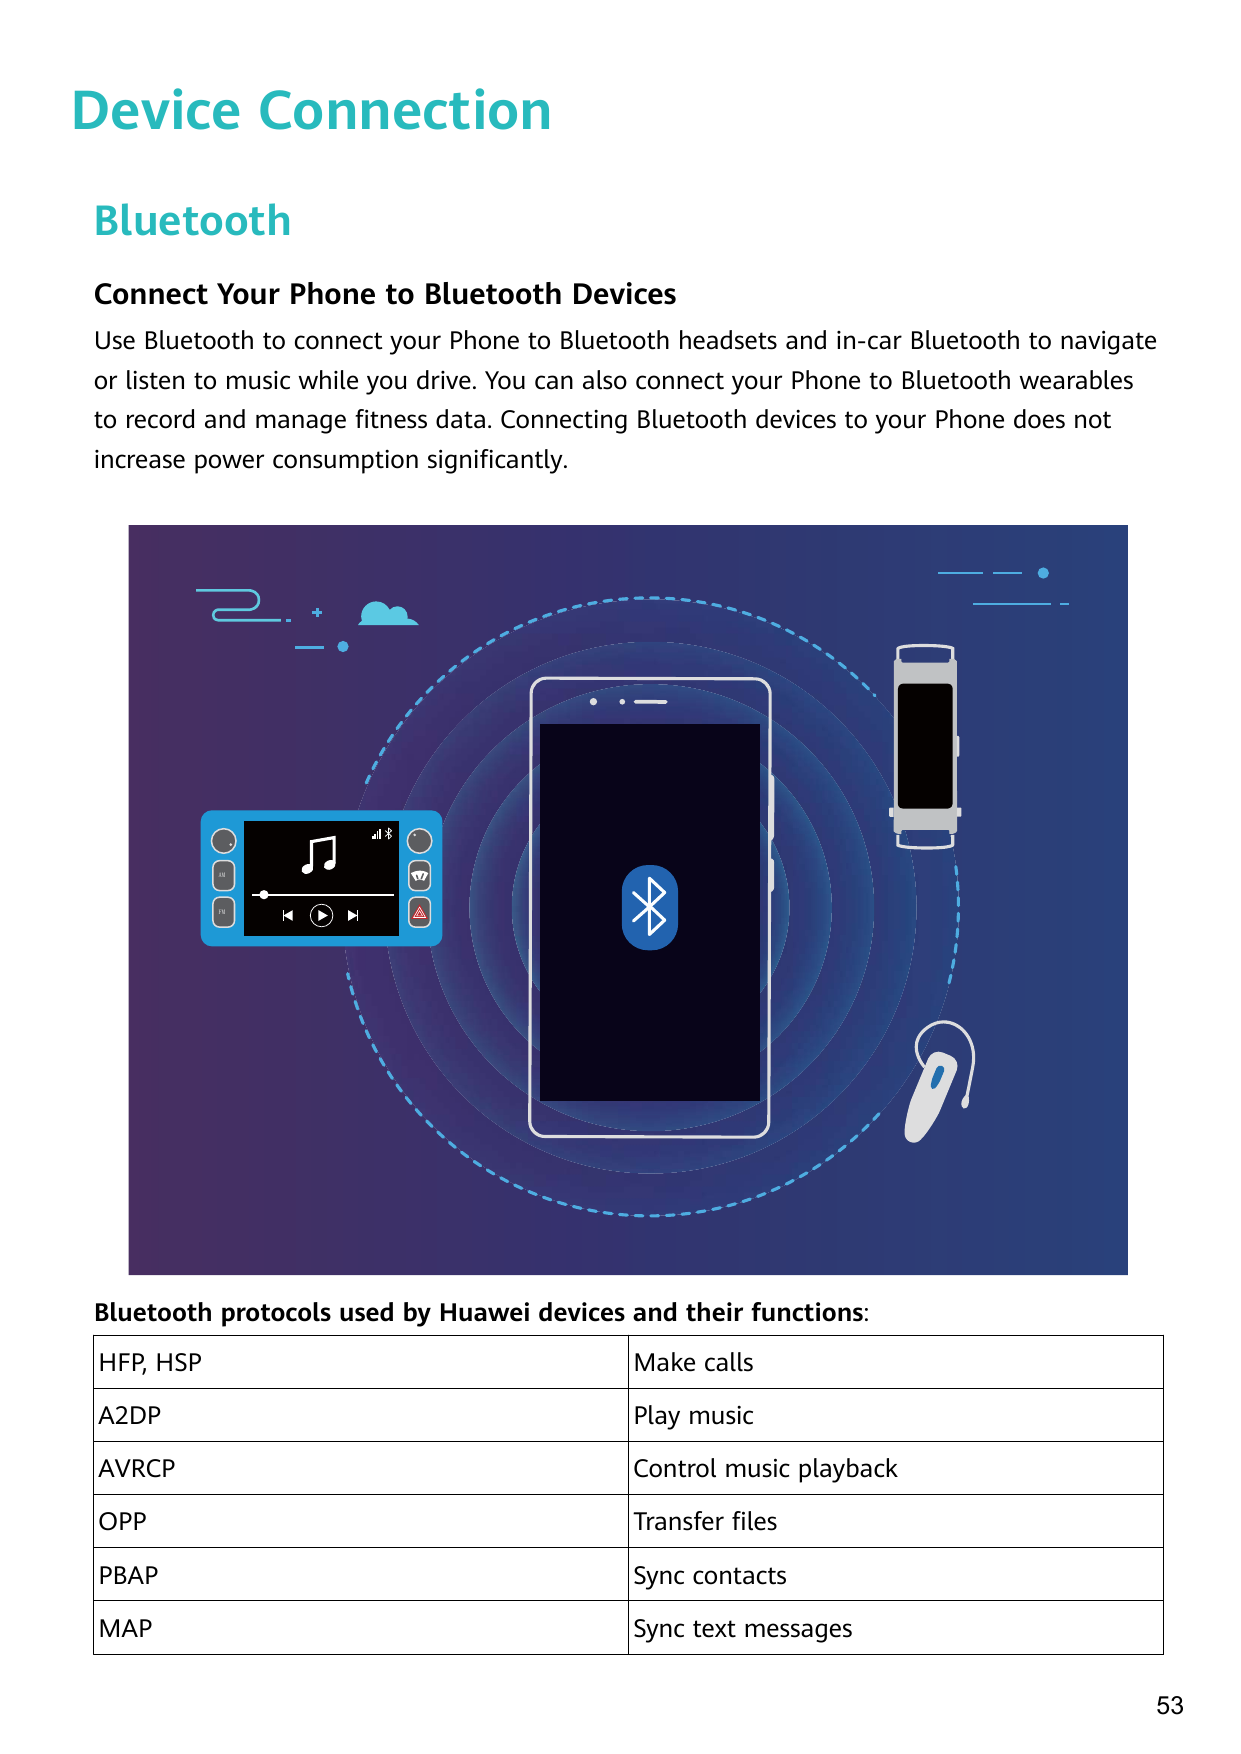 Device ConnectionBluetoothConnect Your Phone to Bluetooth DevicesUse Bluetooth to connect your Phone to Bluetooth headsets and i